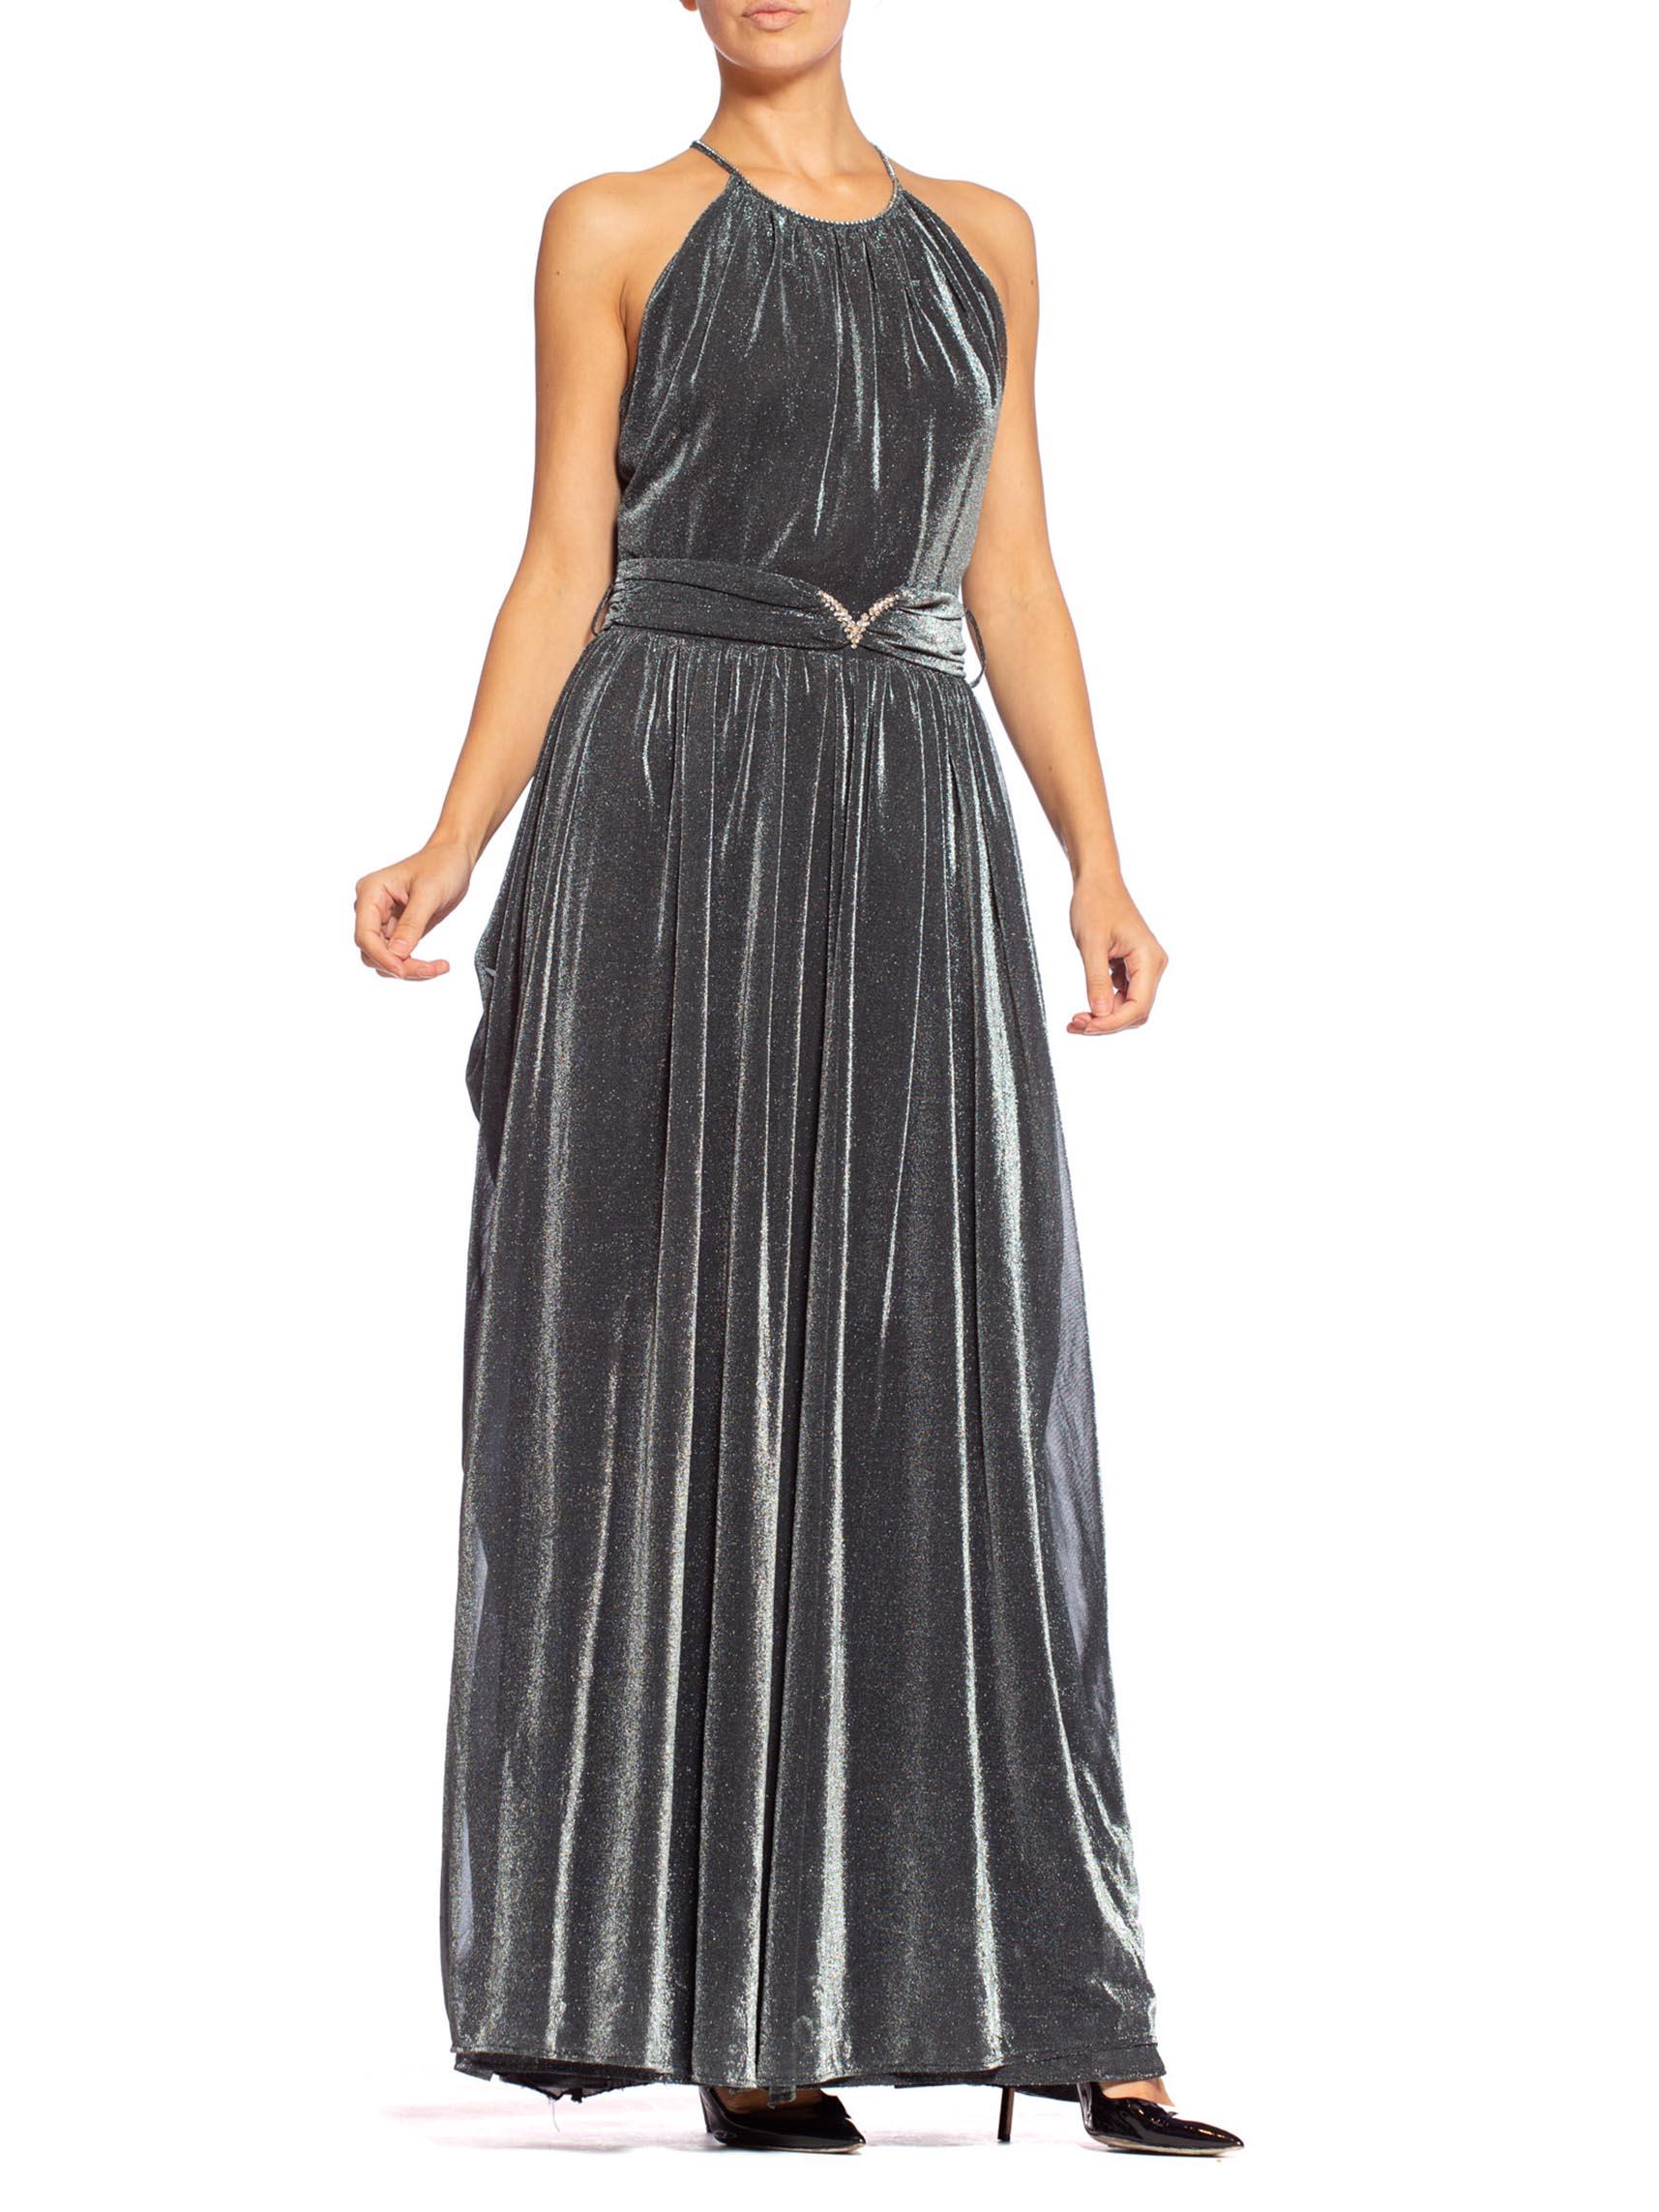 Black 1970S Silver Metallic Lurex Knit Slinky Disco Gown With Attached Cape & Crystal